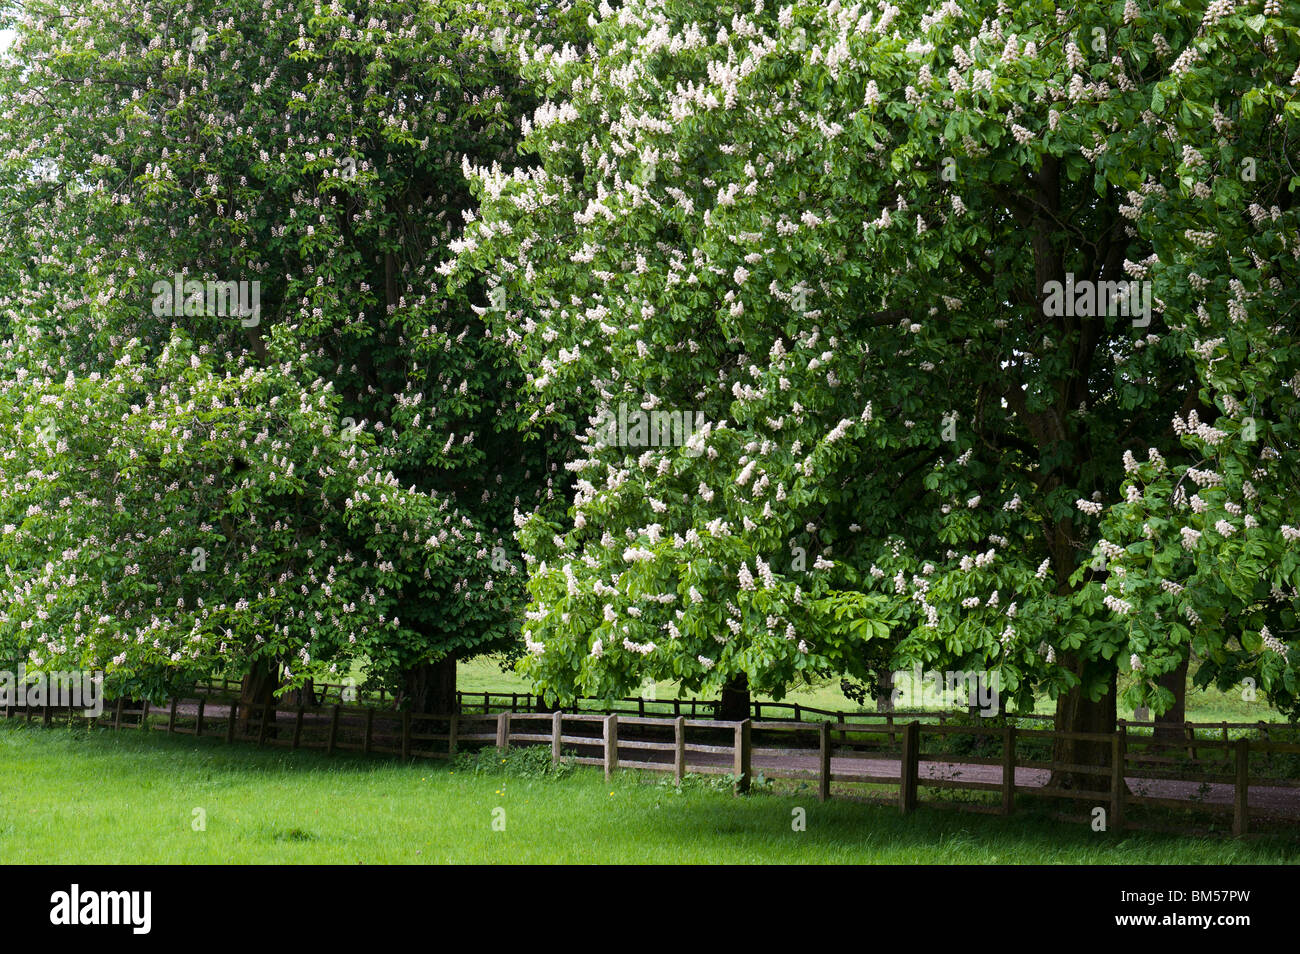 Aesculus Hippocastanum. Avenue of flowering Horse chestnut trees in the Oxfordshire countryside. England Stock Photo